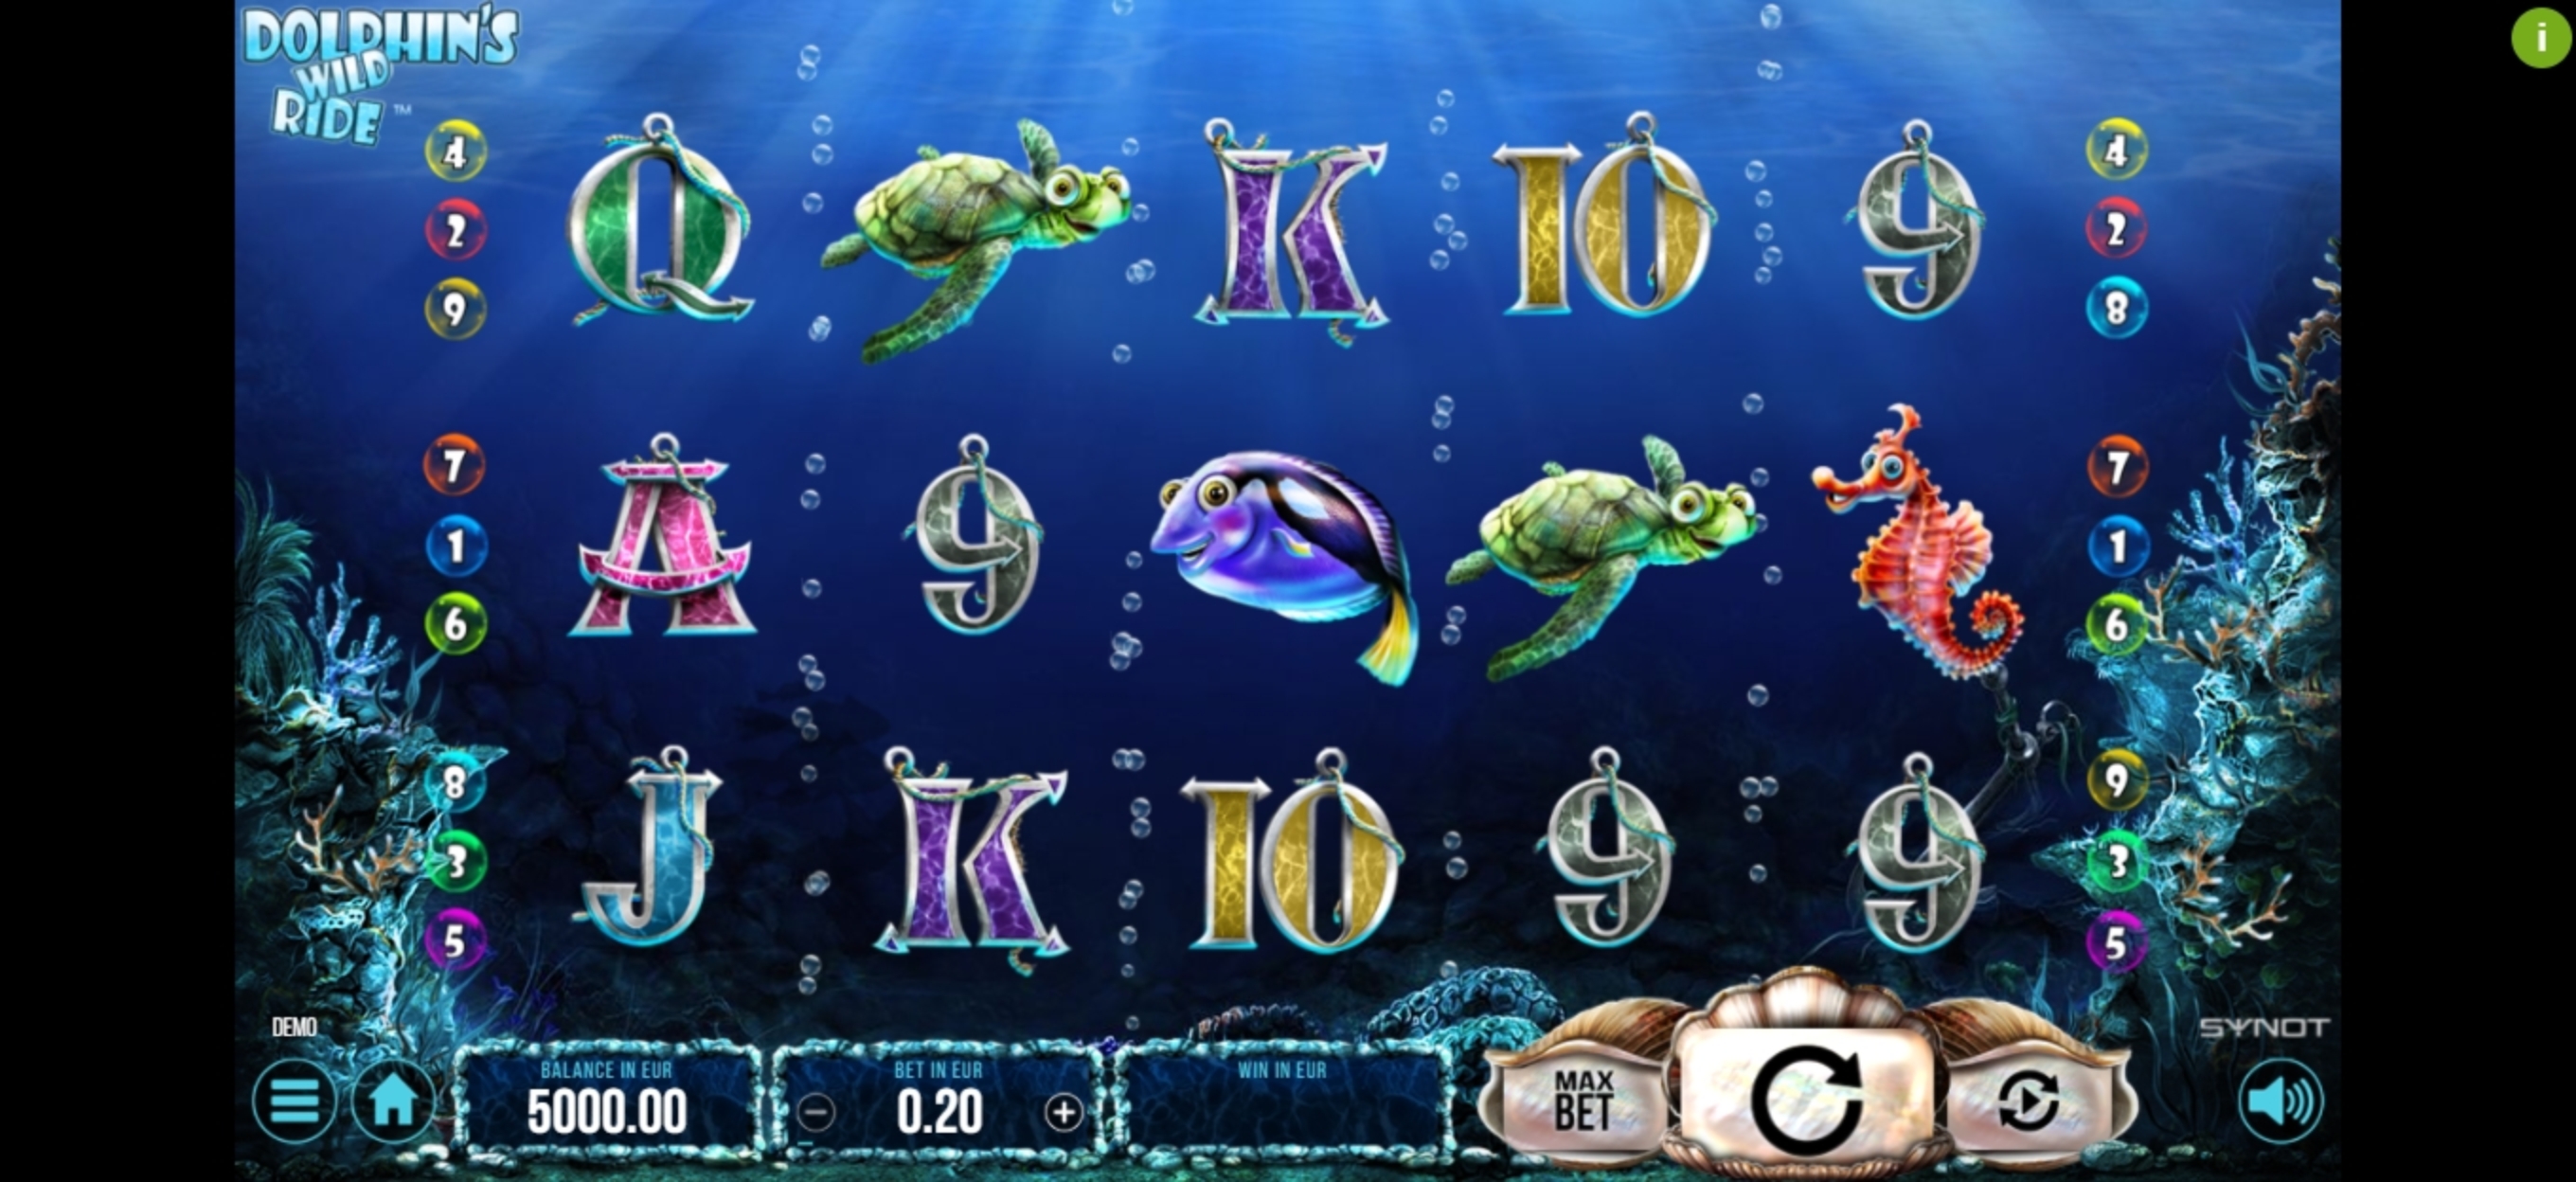 Reels in Dolphin's Wild Ride Slot Game by Synot Games